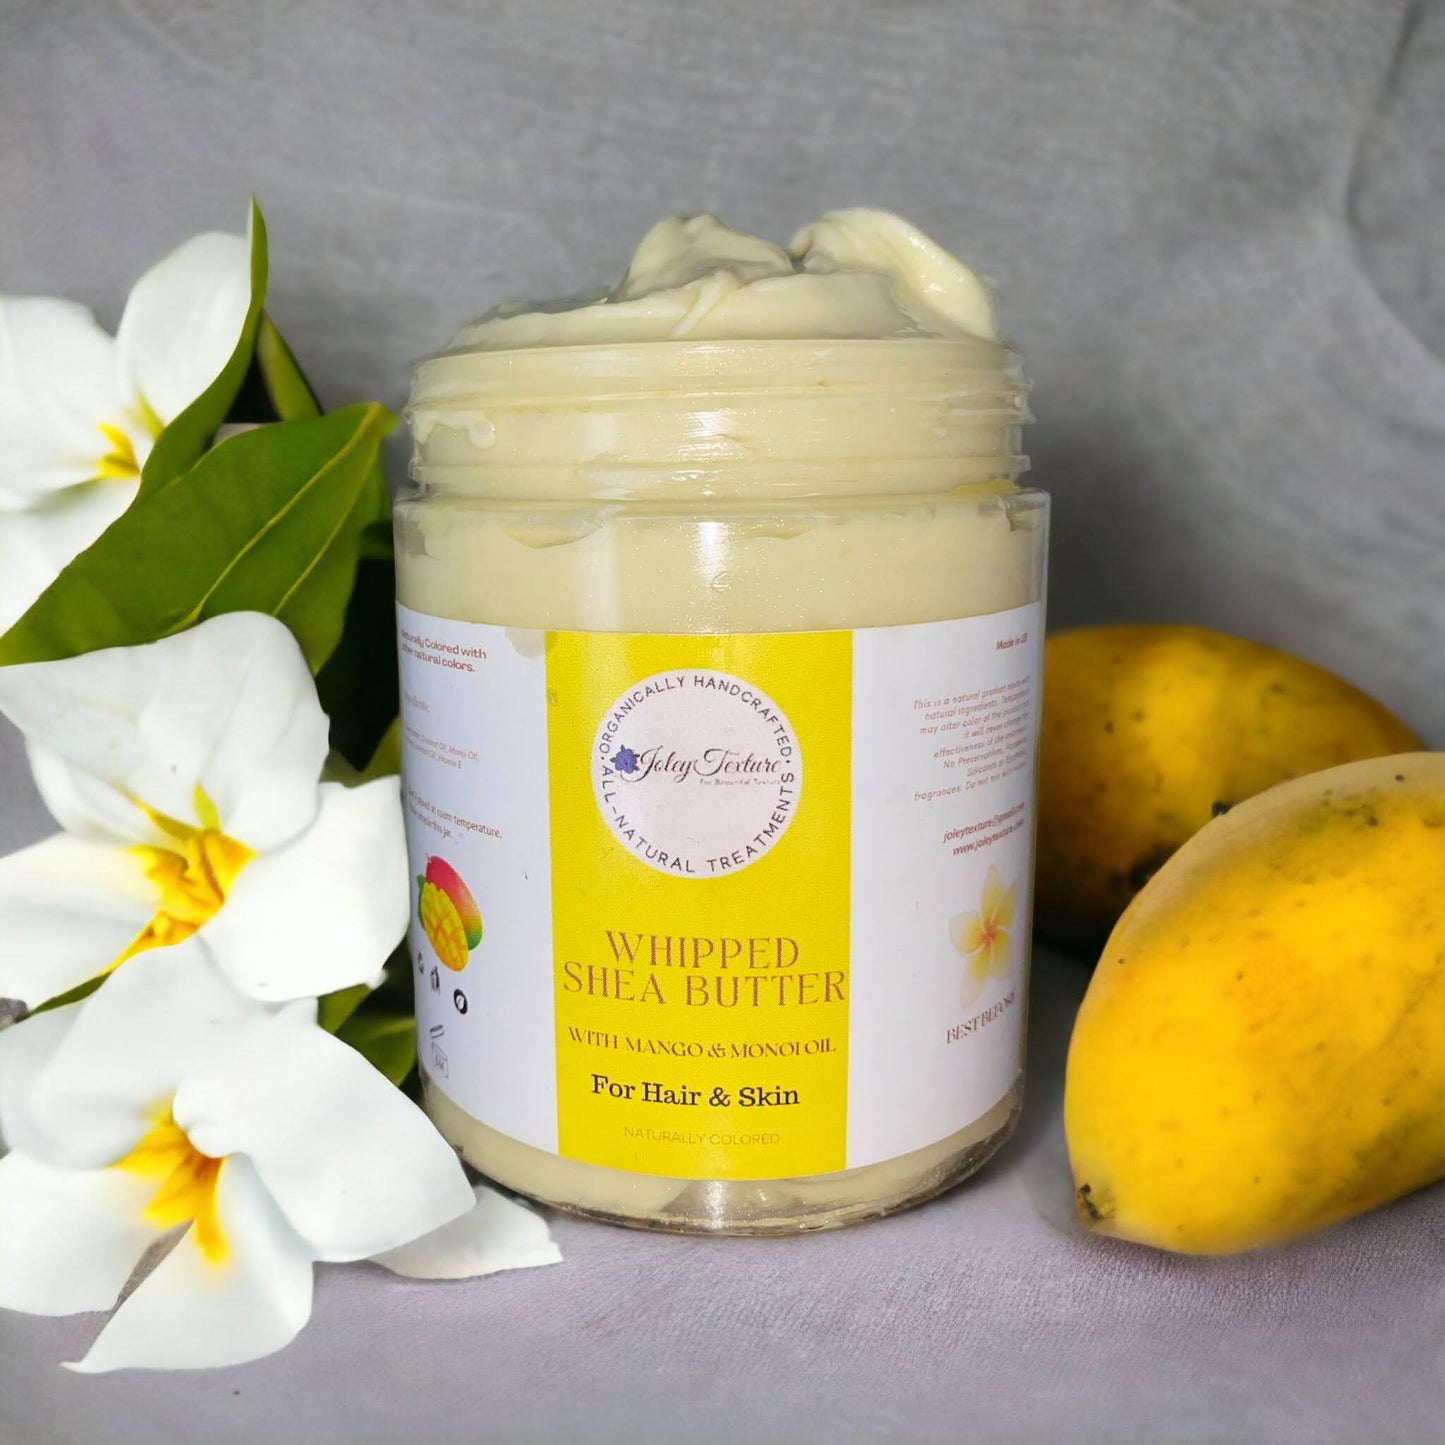 Mango-Apricot Whipped Shea Butter, For Hair and Skin, 4 Oz